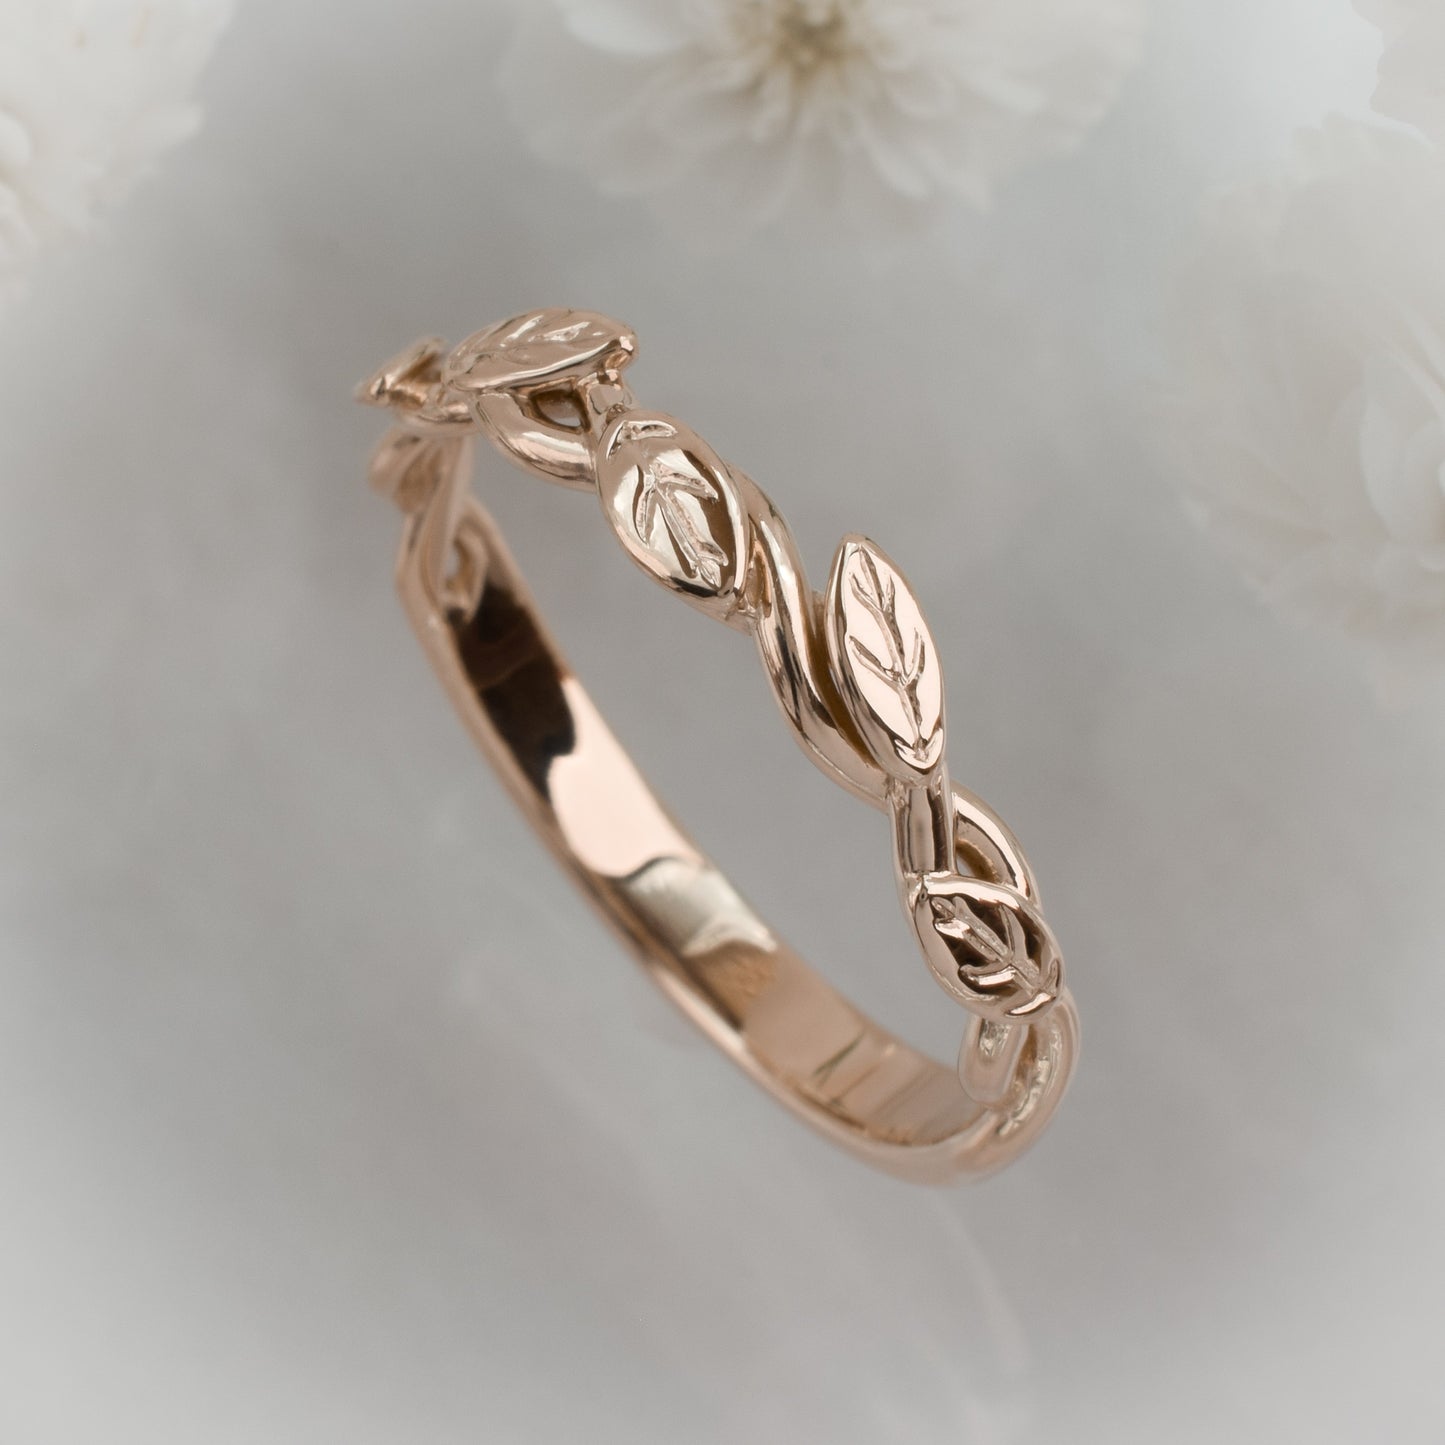 intertwined vine ring with leaves in solid rose gold - oblique view